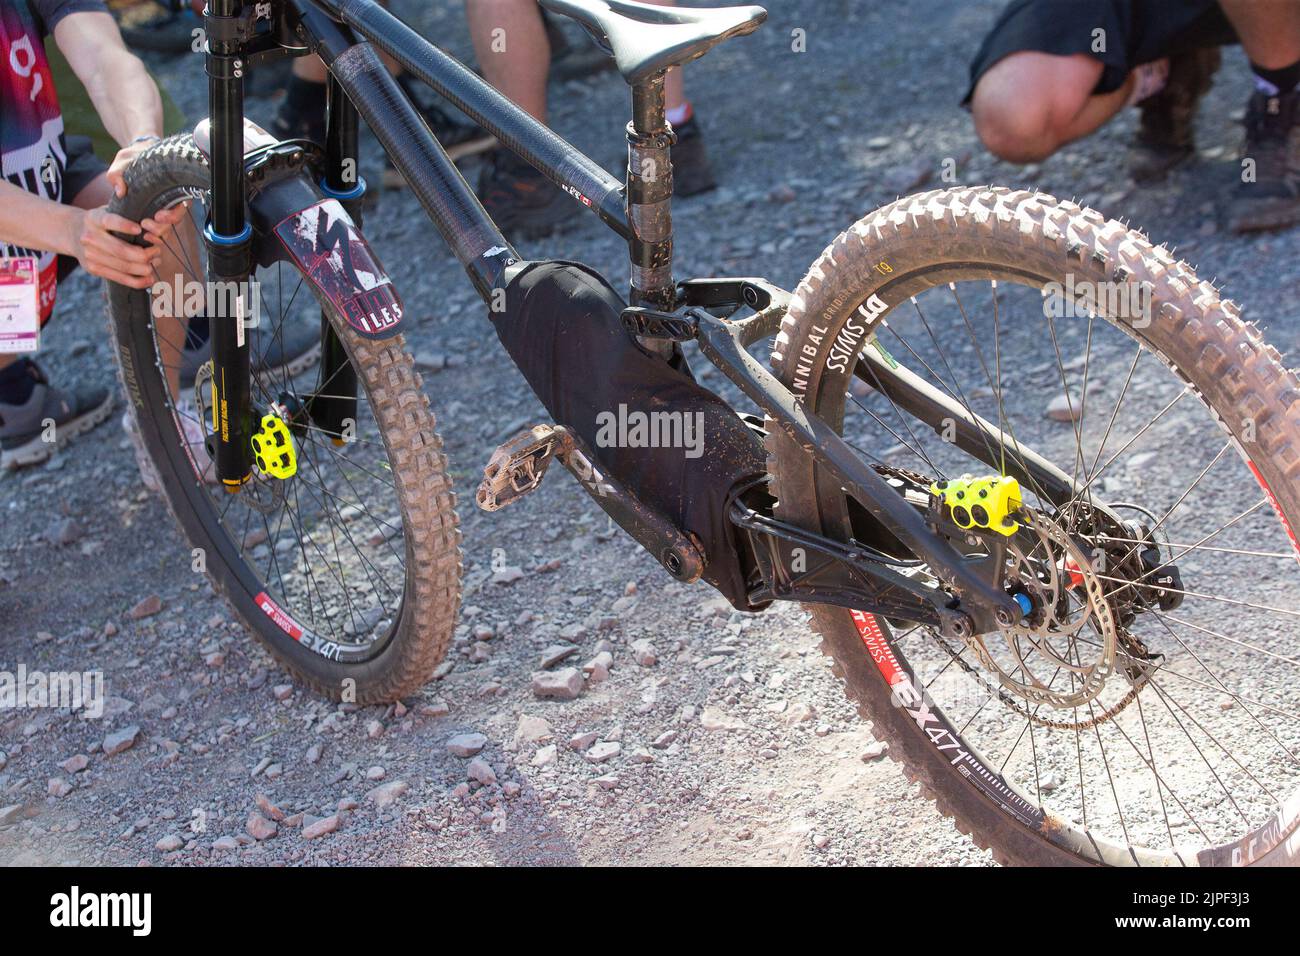 August 06, 2022: Finn IlesÕ (3) bike with a dislodged drive chain after winning the MenÕs Downhill Final during the 2022 Mercedes-Benz UCI Mountain Bike World Cup held at Mont-Sainte-Anne in Beaupre, Quebec, Canada. Daniel Lea/CSM Stock Photo